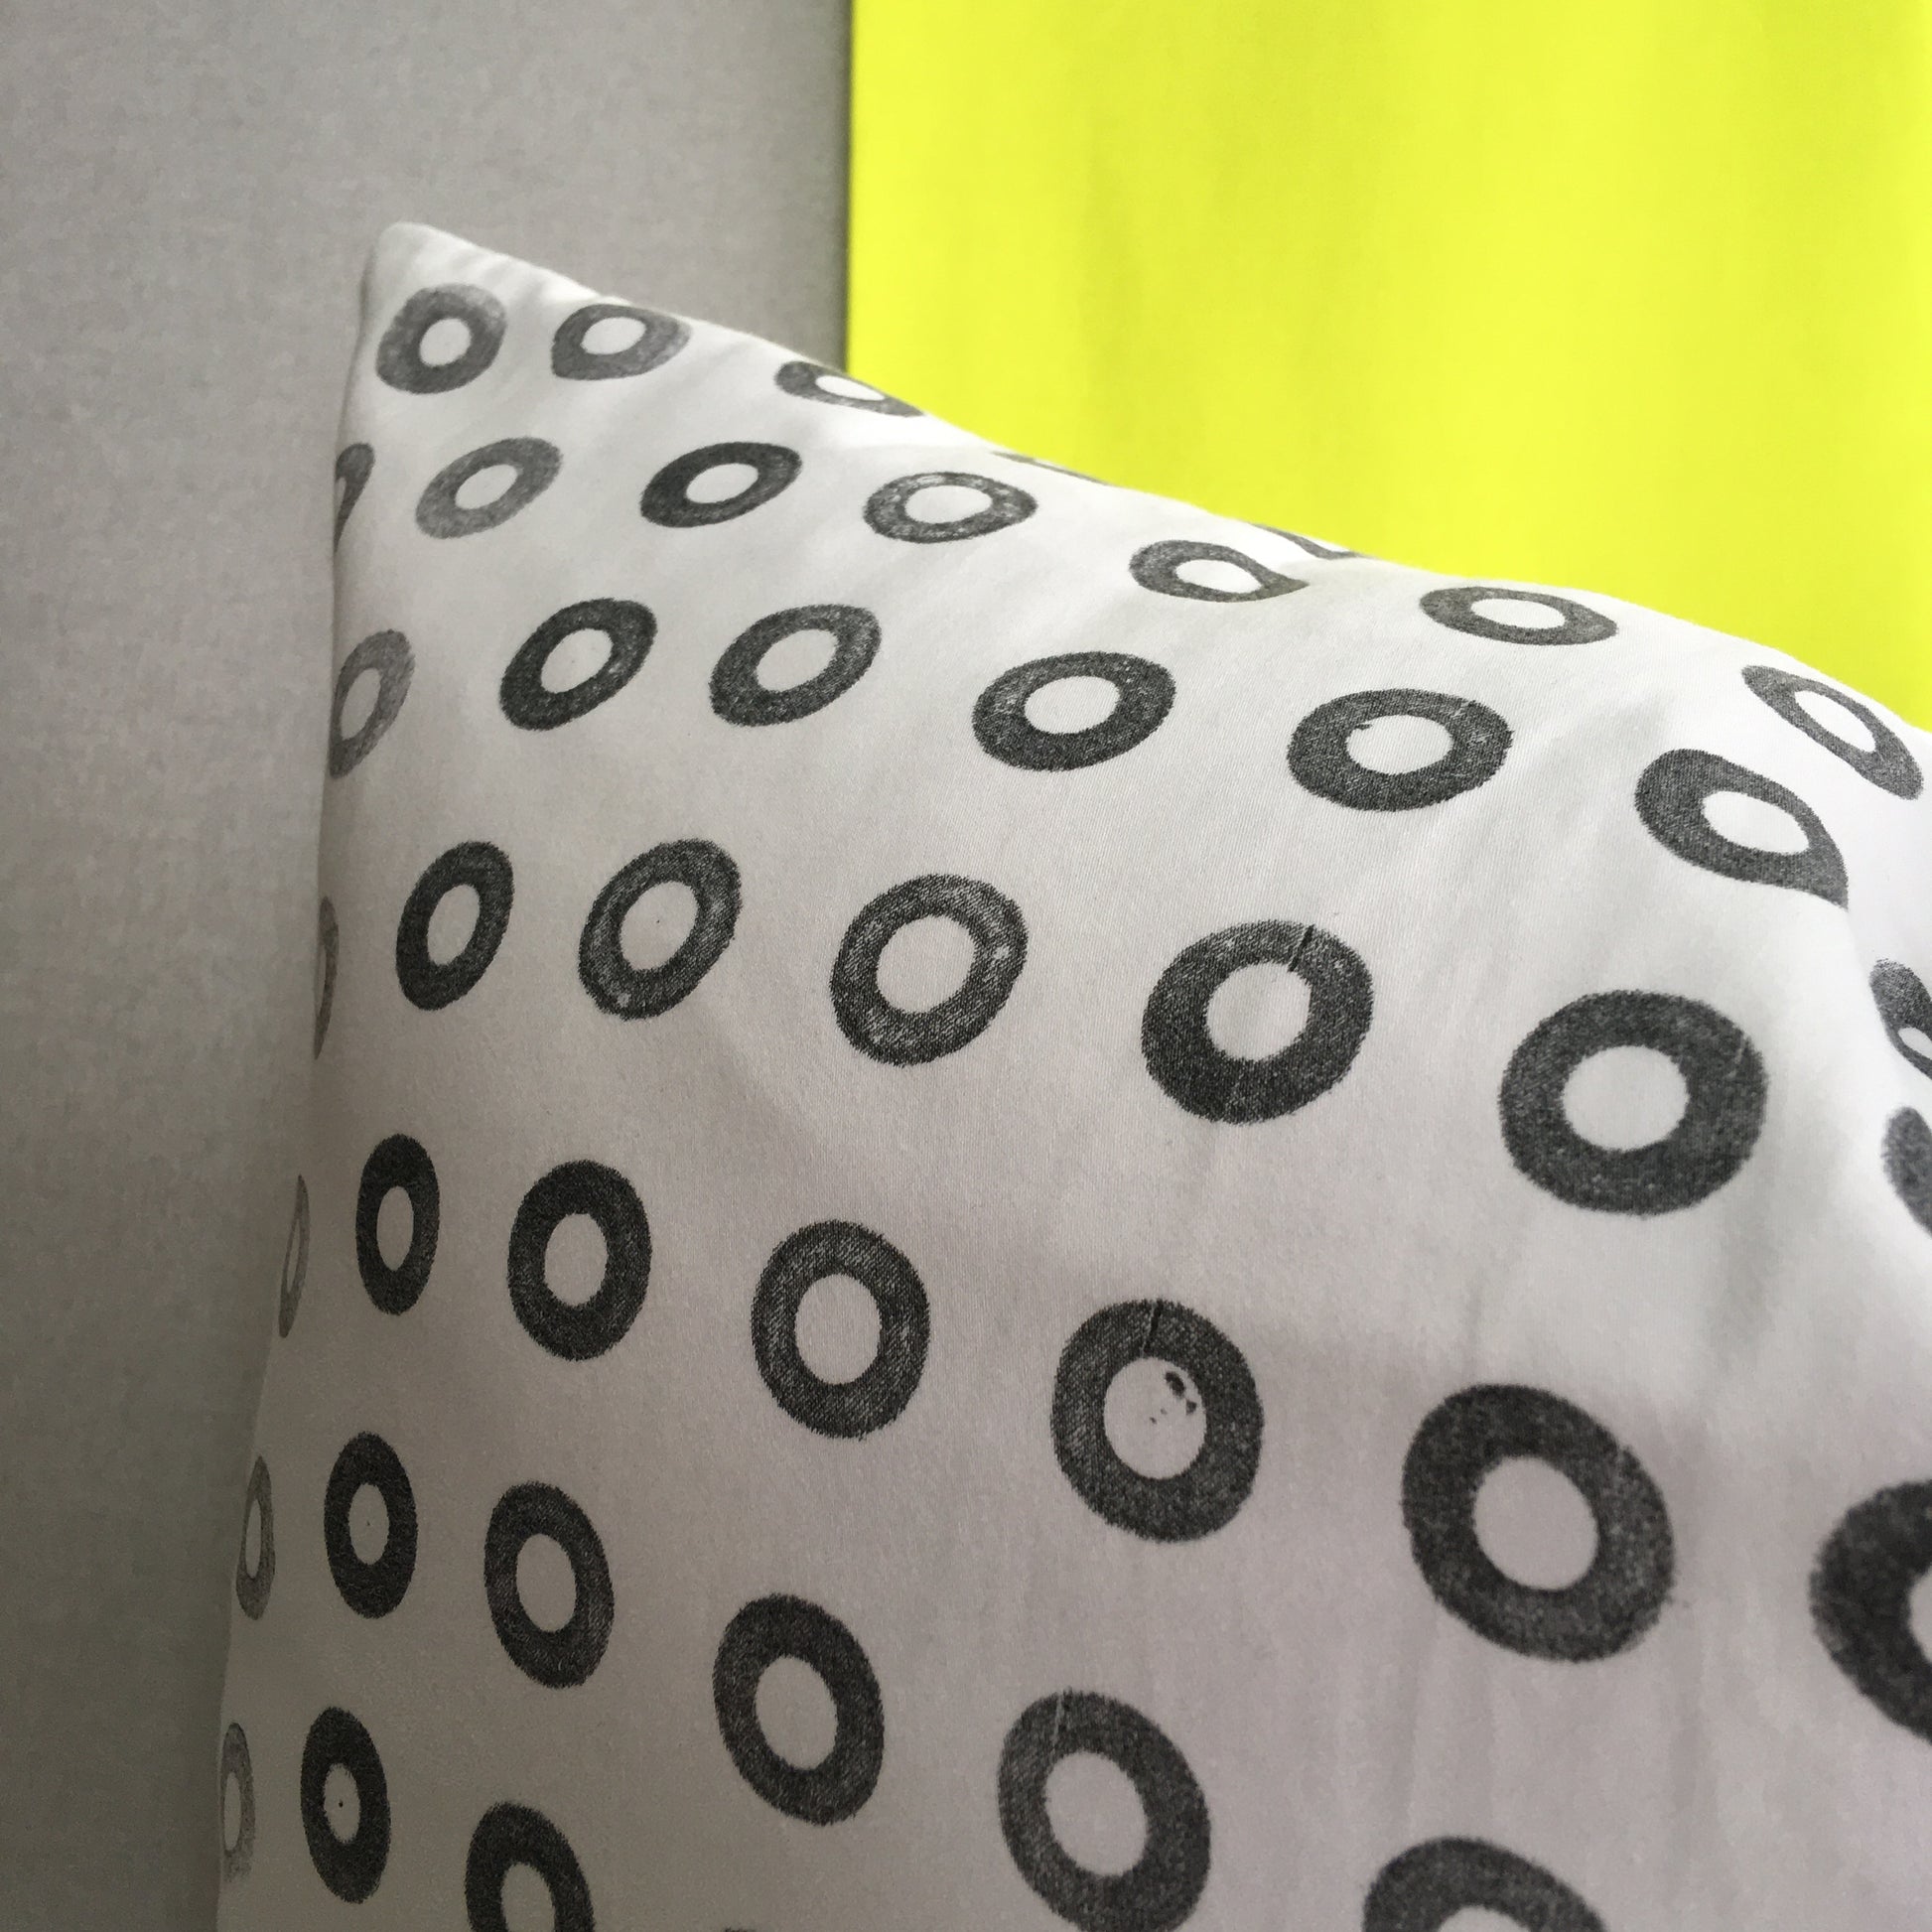 A hand printed cushion, made from reclaimed cotton, sits against a grey and acid yellow background. It features a grid of small black rings, printed using found beach waste.